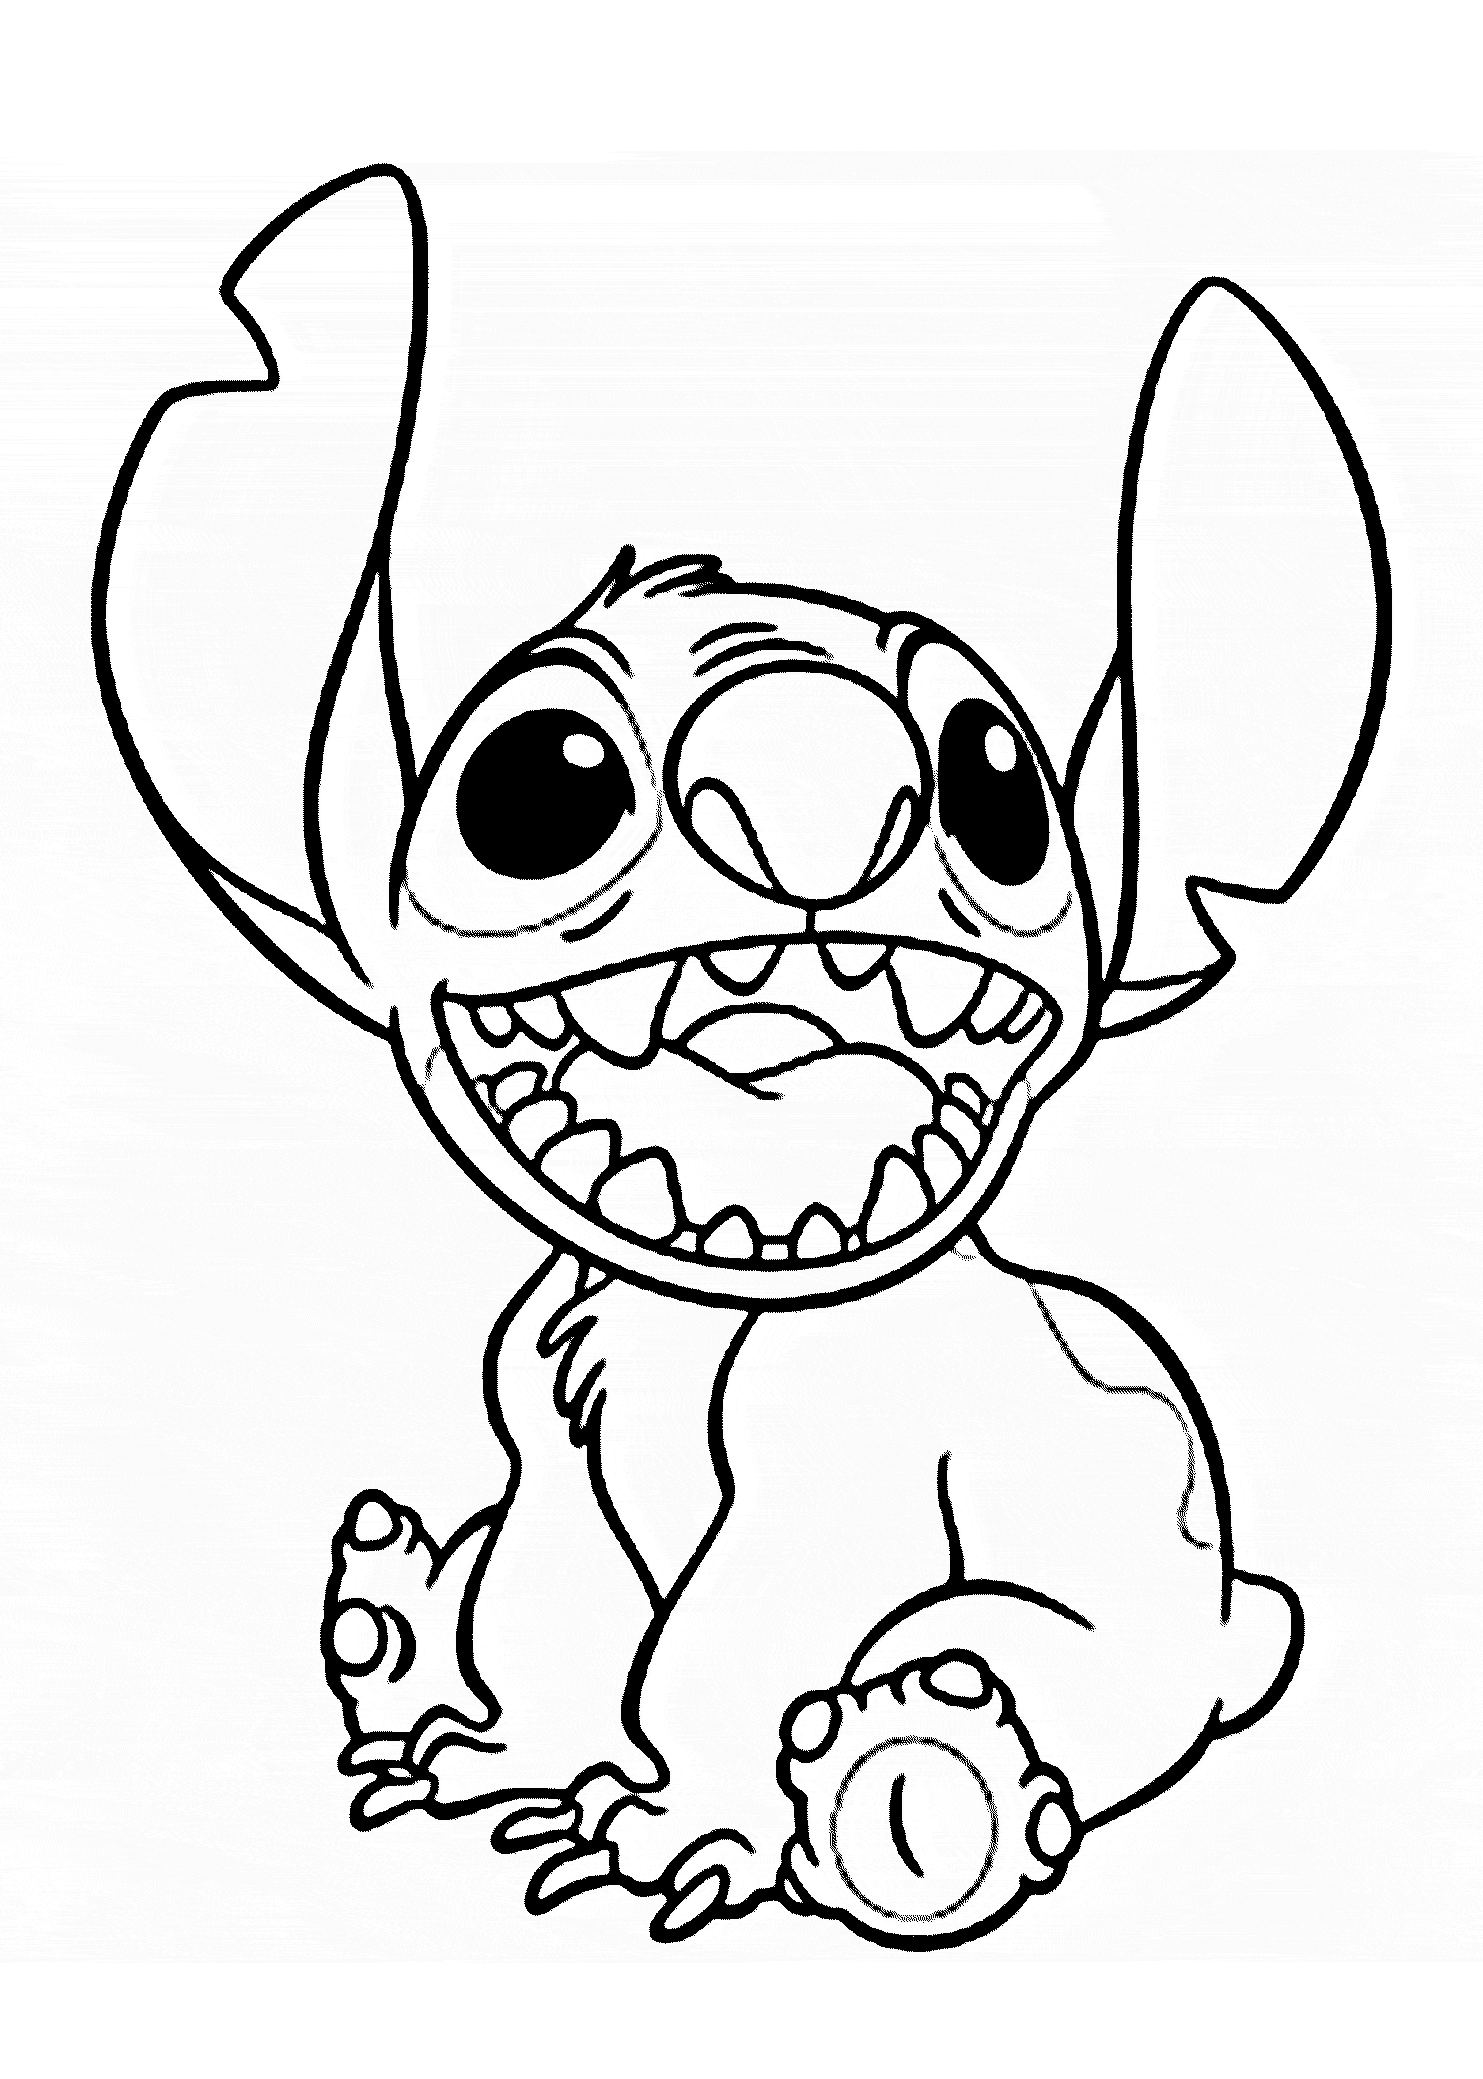  Coloring Pages Of Characters 10